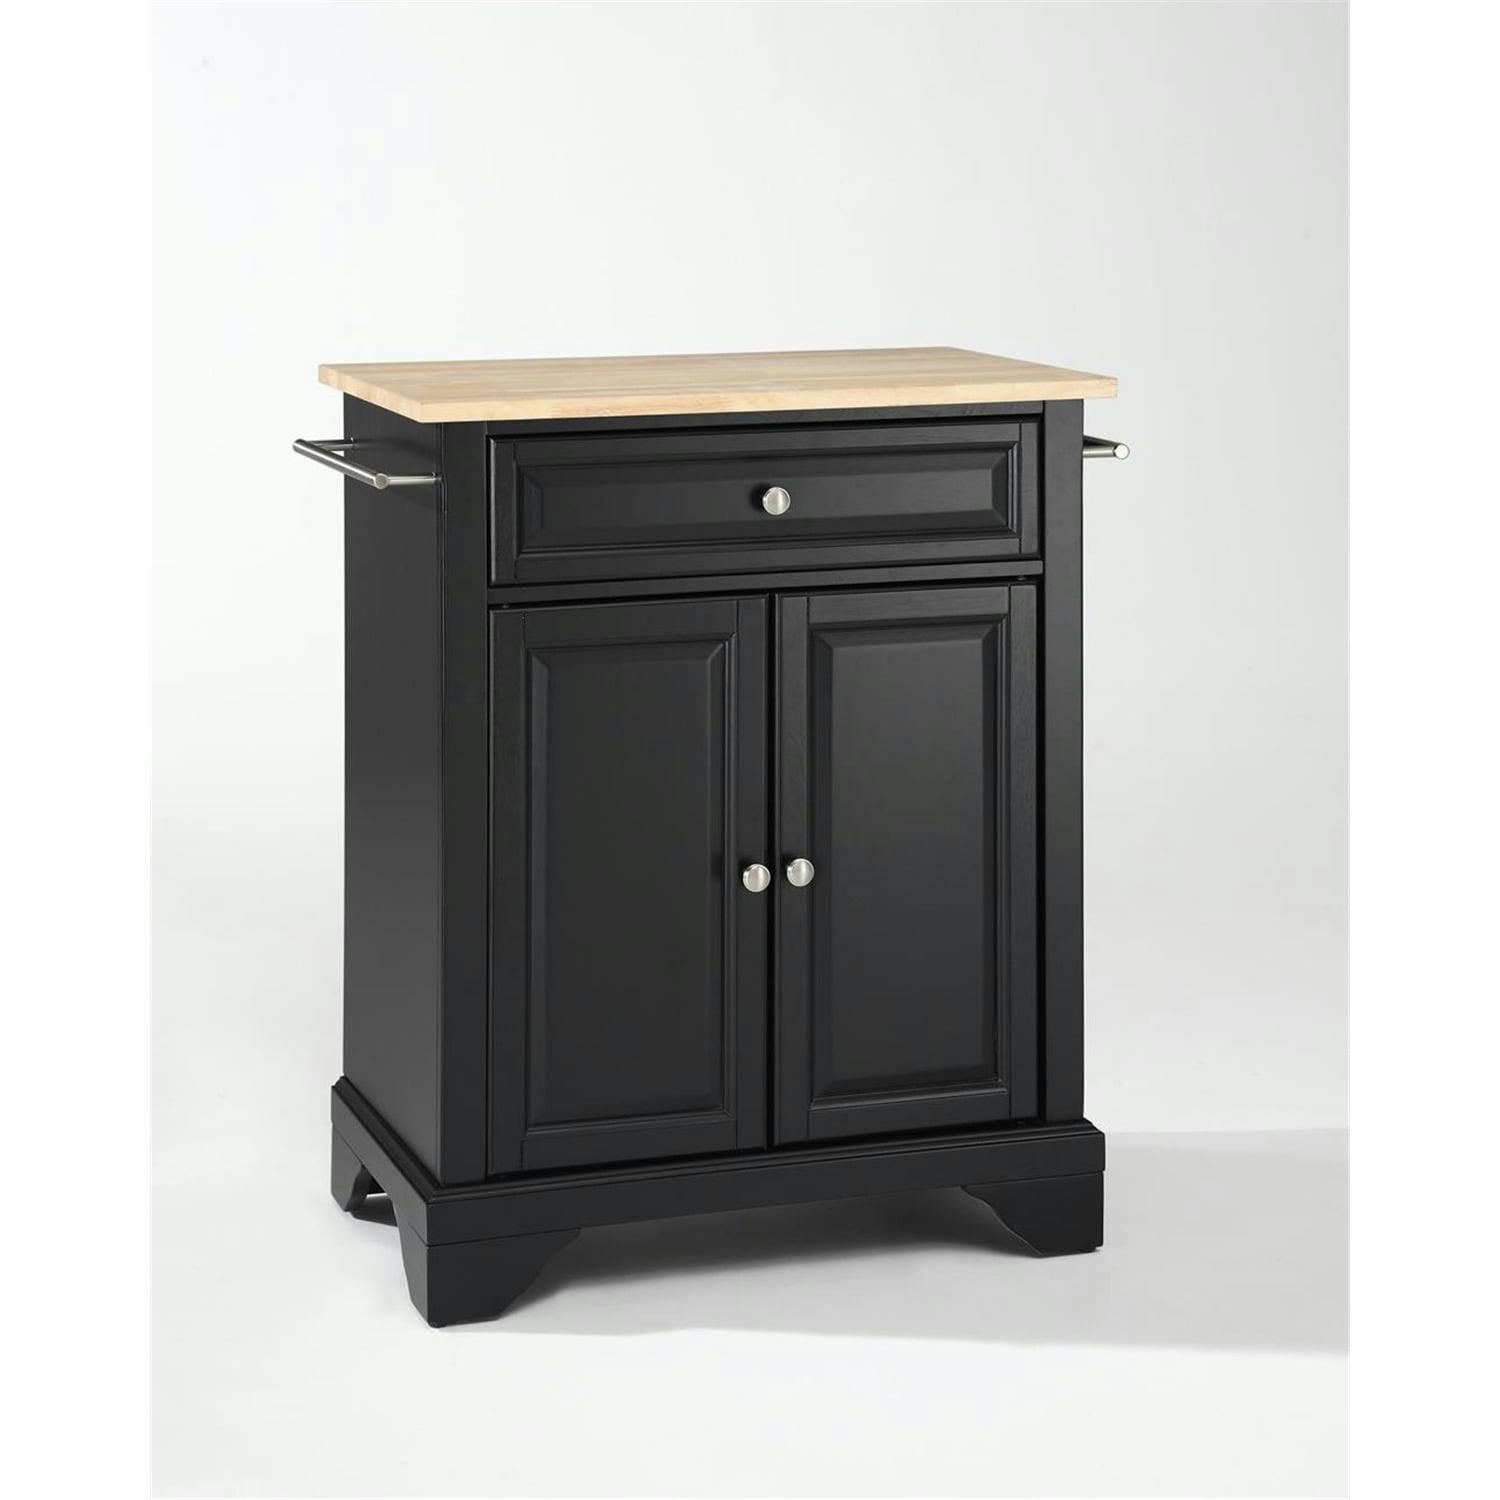 Lafayette 34.75'' Black Portable Kitchen Island with Natural Wood Top